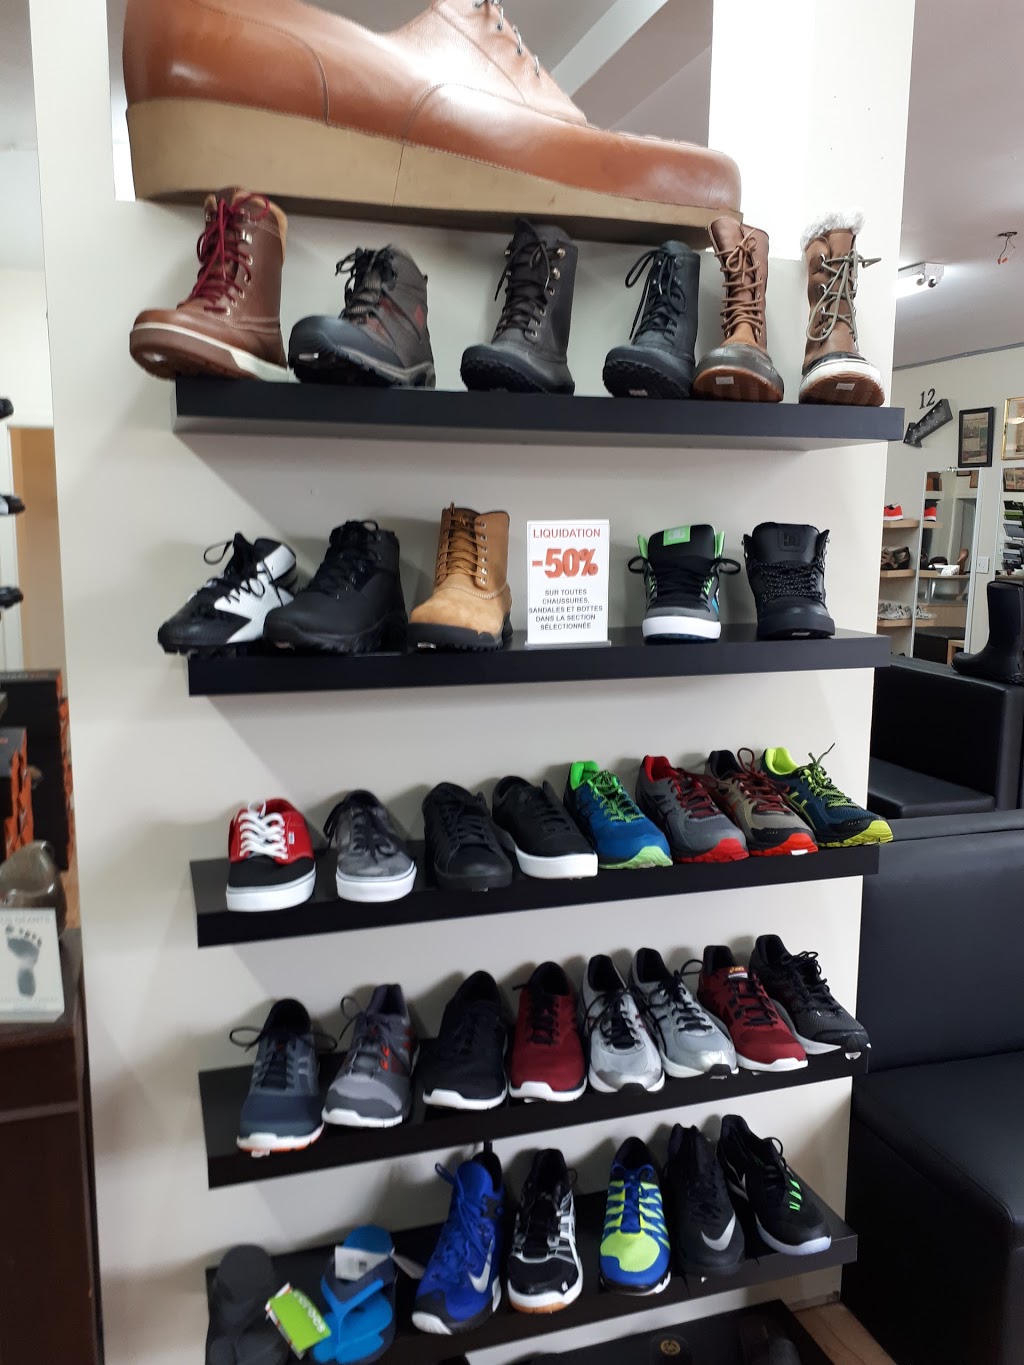 Pieds Geants Chaussures | 504 Notre-Dame Aile B Suite 1000, Repentigny, QC J6A 2T8, Canada | Phone: (514) 586-0023